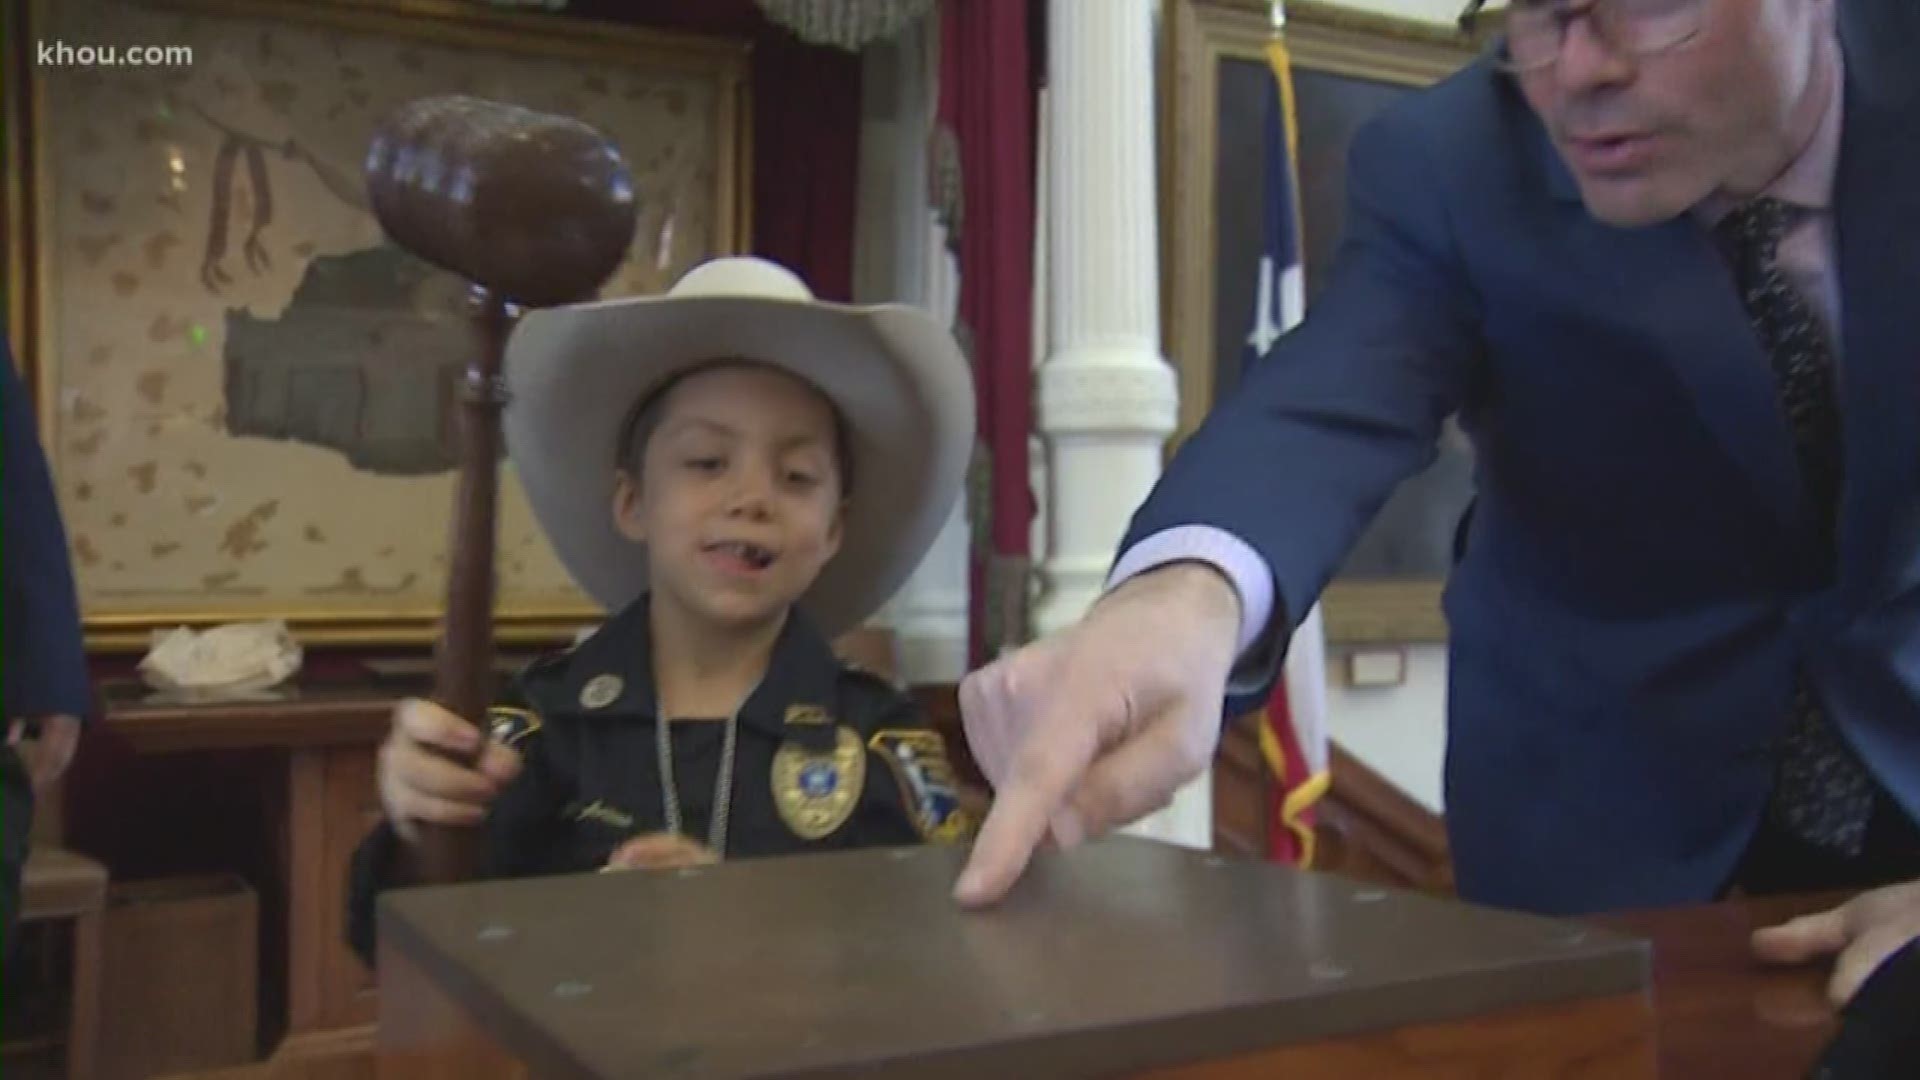 A 6-year-old Freeport Police Officer with terminal cancer has a new job. Abigail Arias became an honorary Texas Ranger.